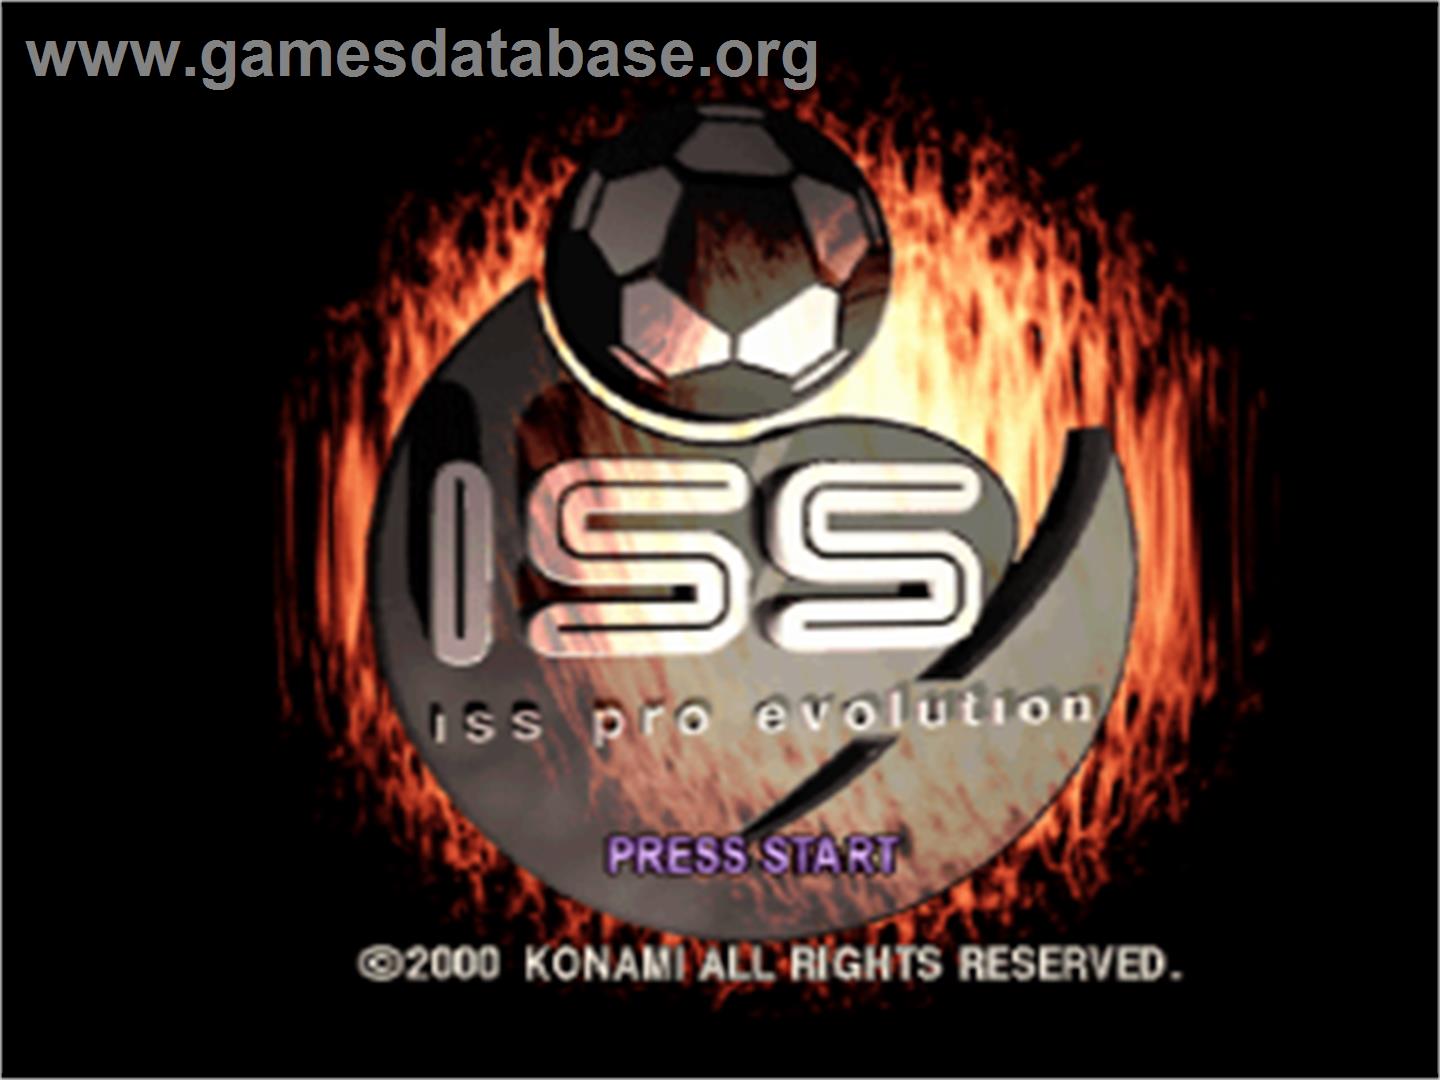 ISS Pro Evolution - Sony Playstation - Artwork - Title Screen